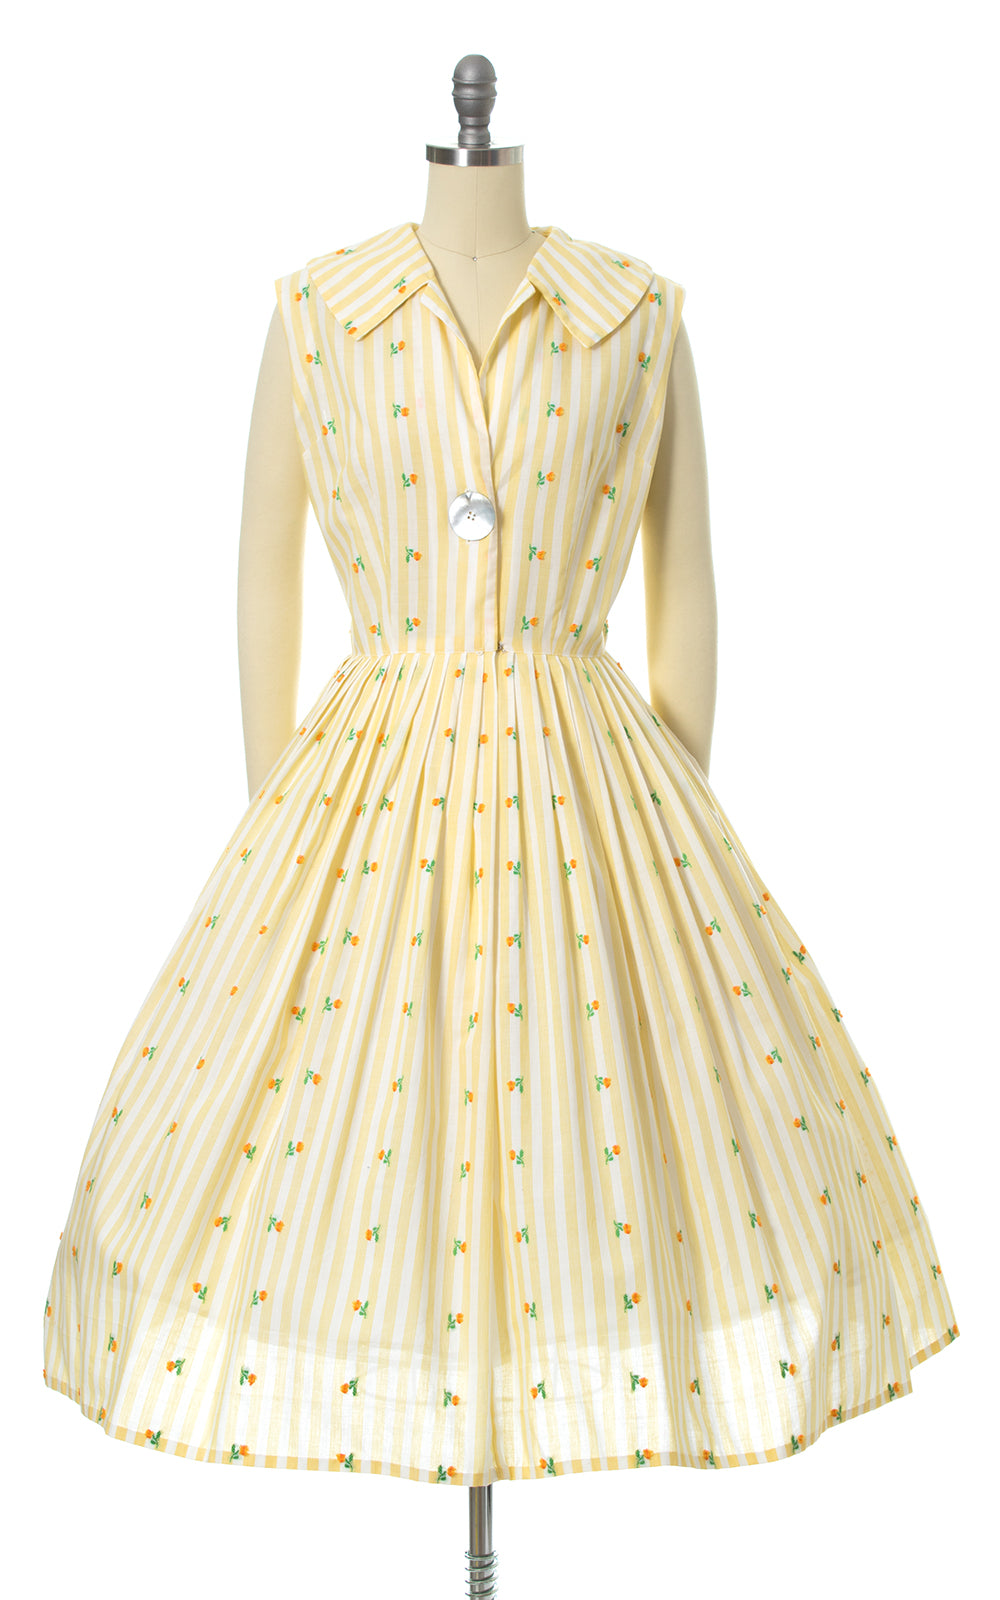 1950s Floral Striped Sundress with Big Abalone Button